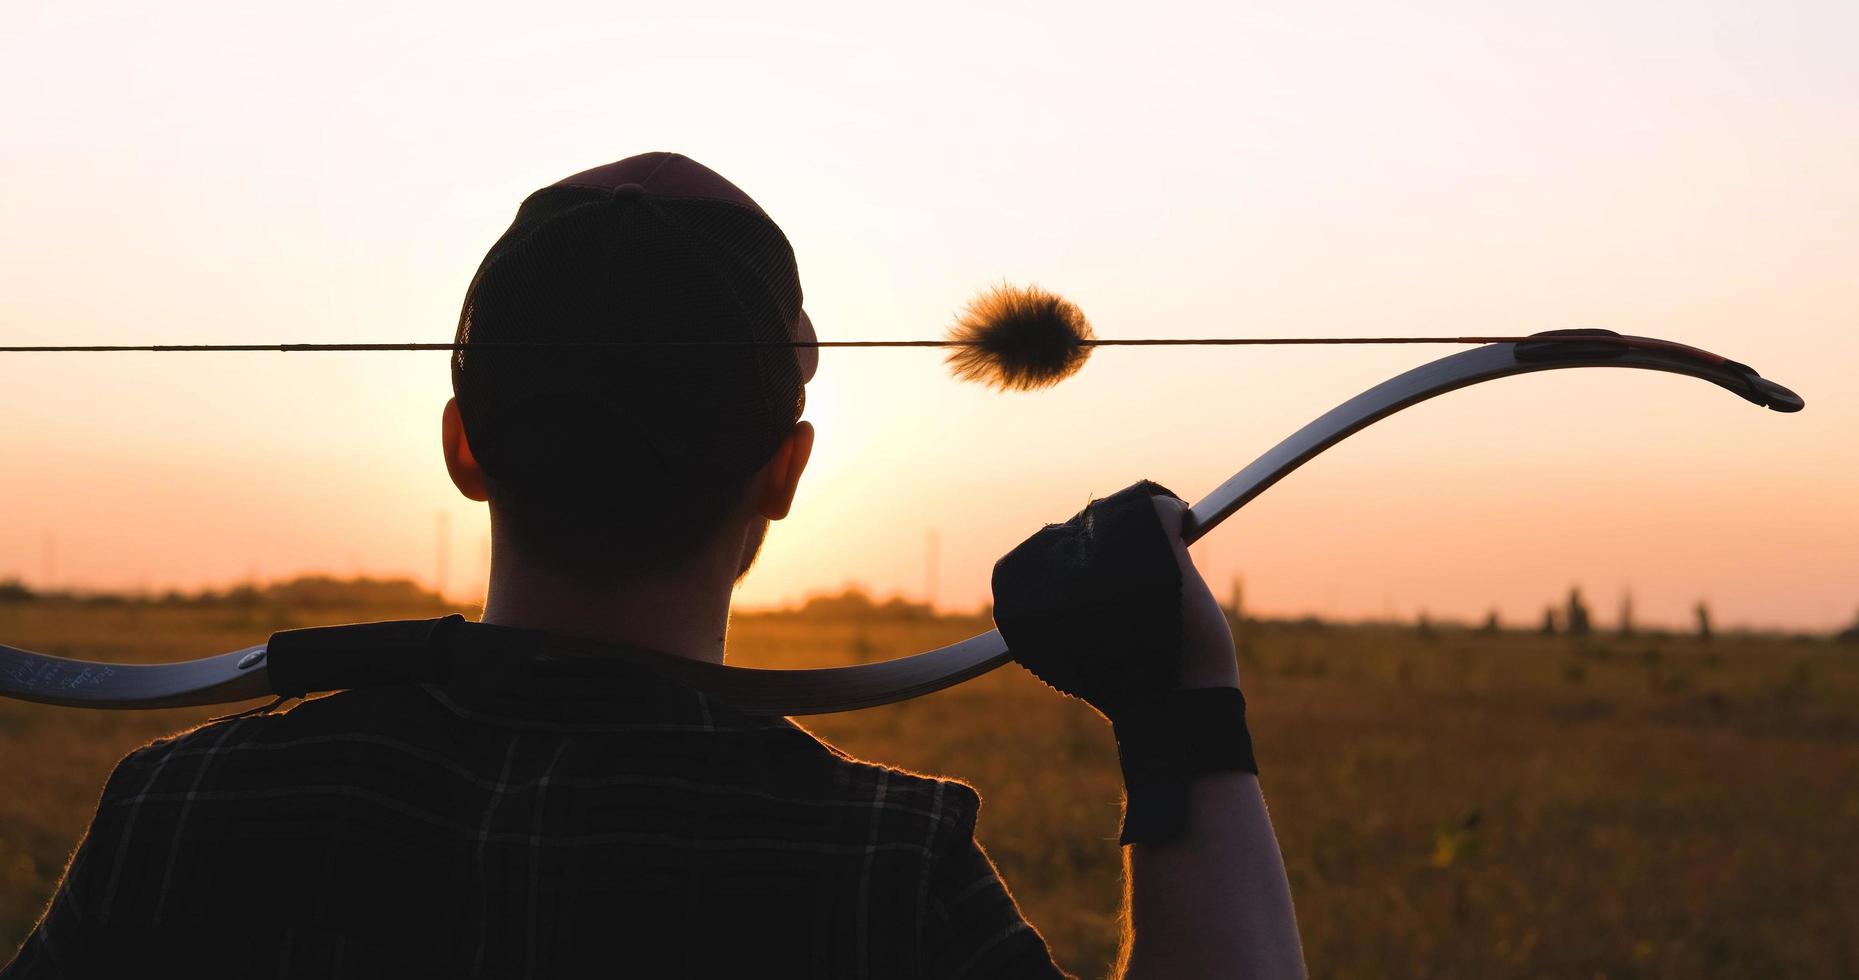 Man with bow outdoors in the field photo